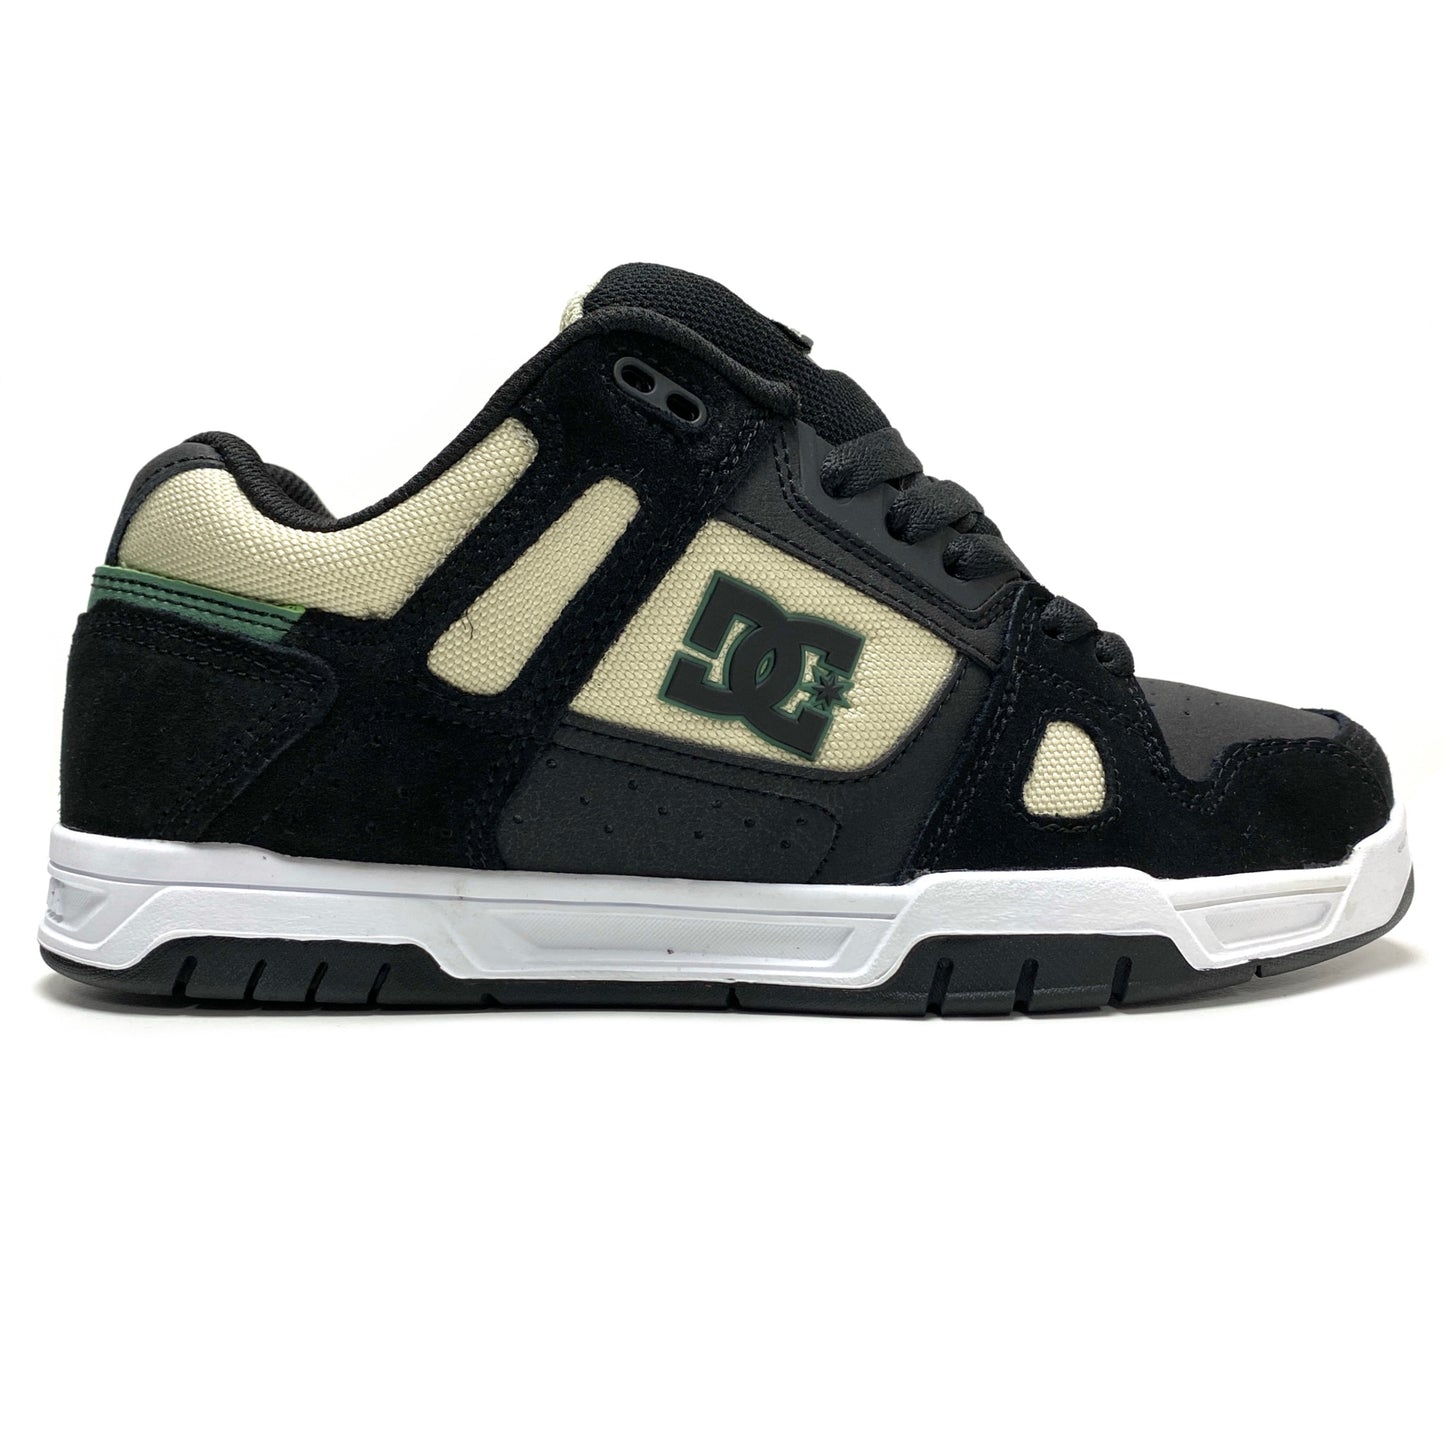 DC SHOES STAG BLACK TAN GREEN TRAINERS